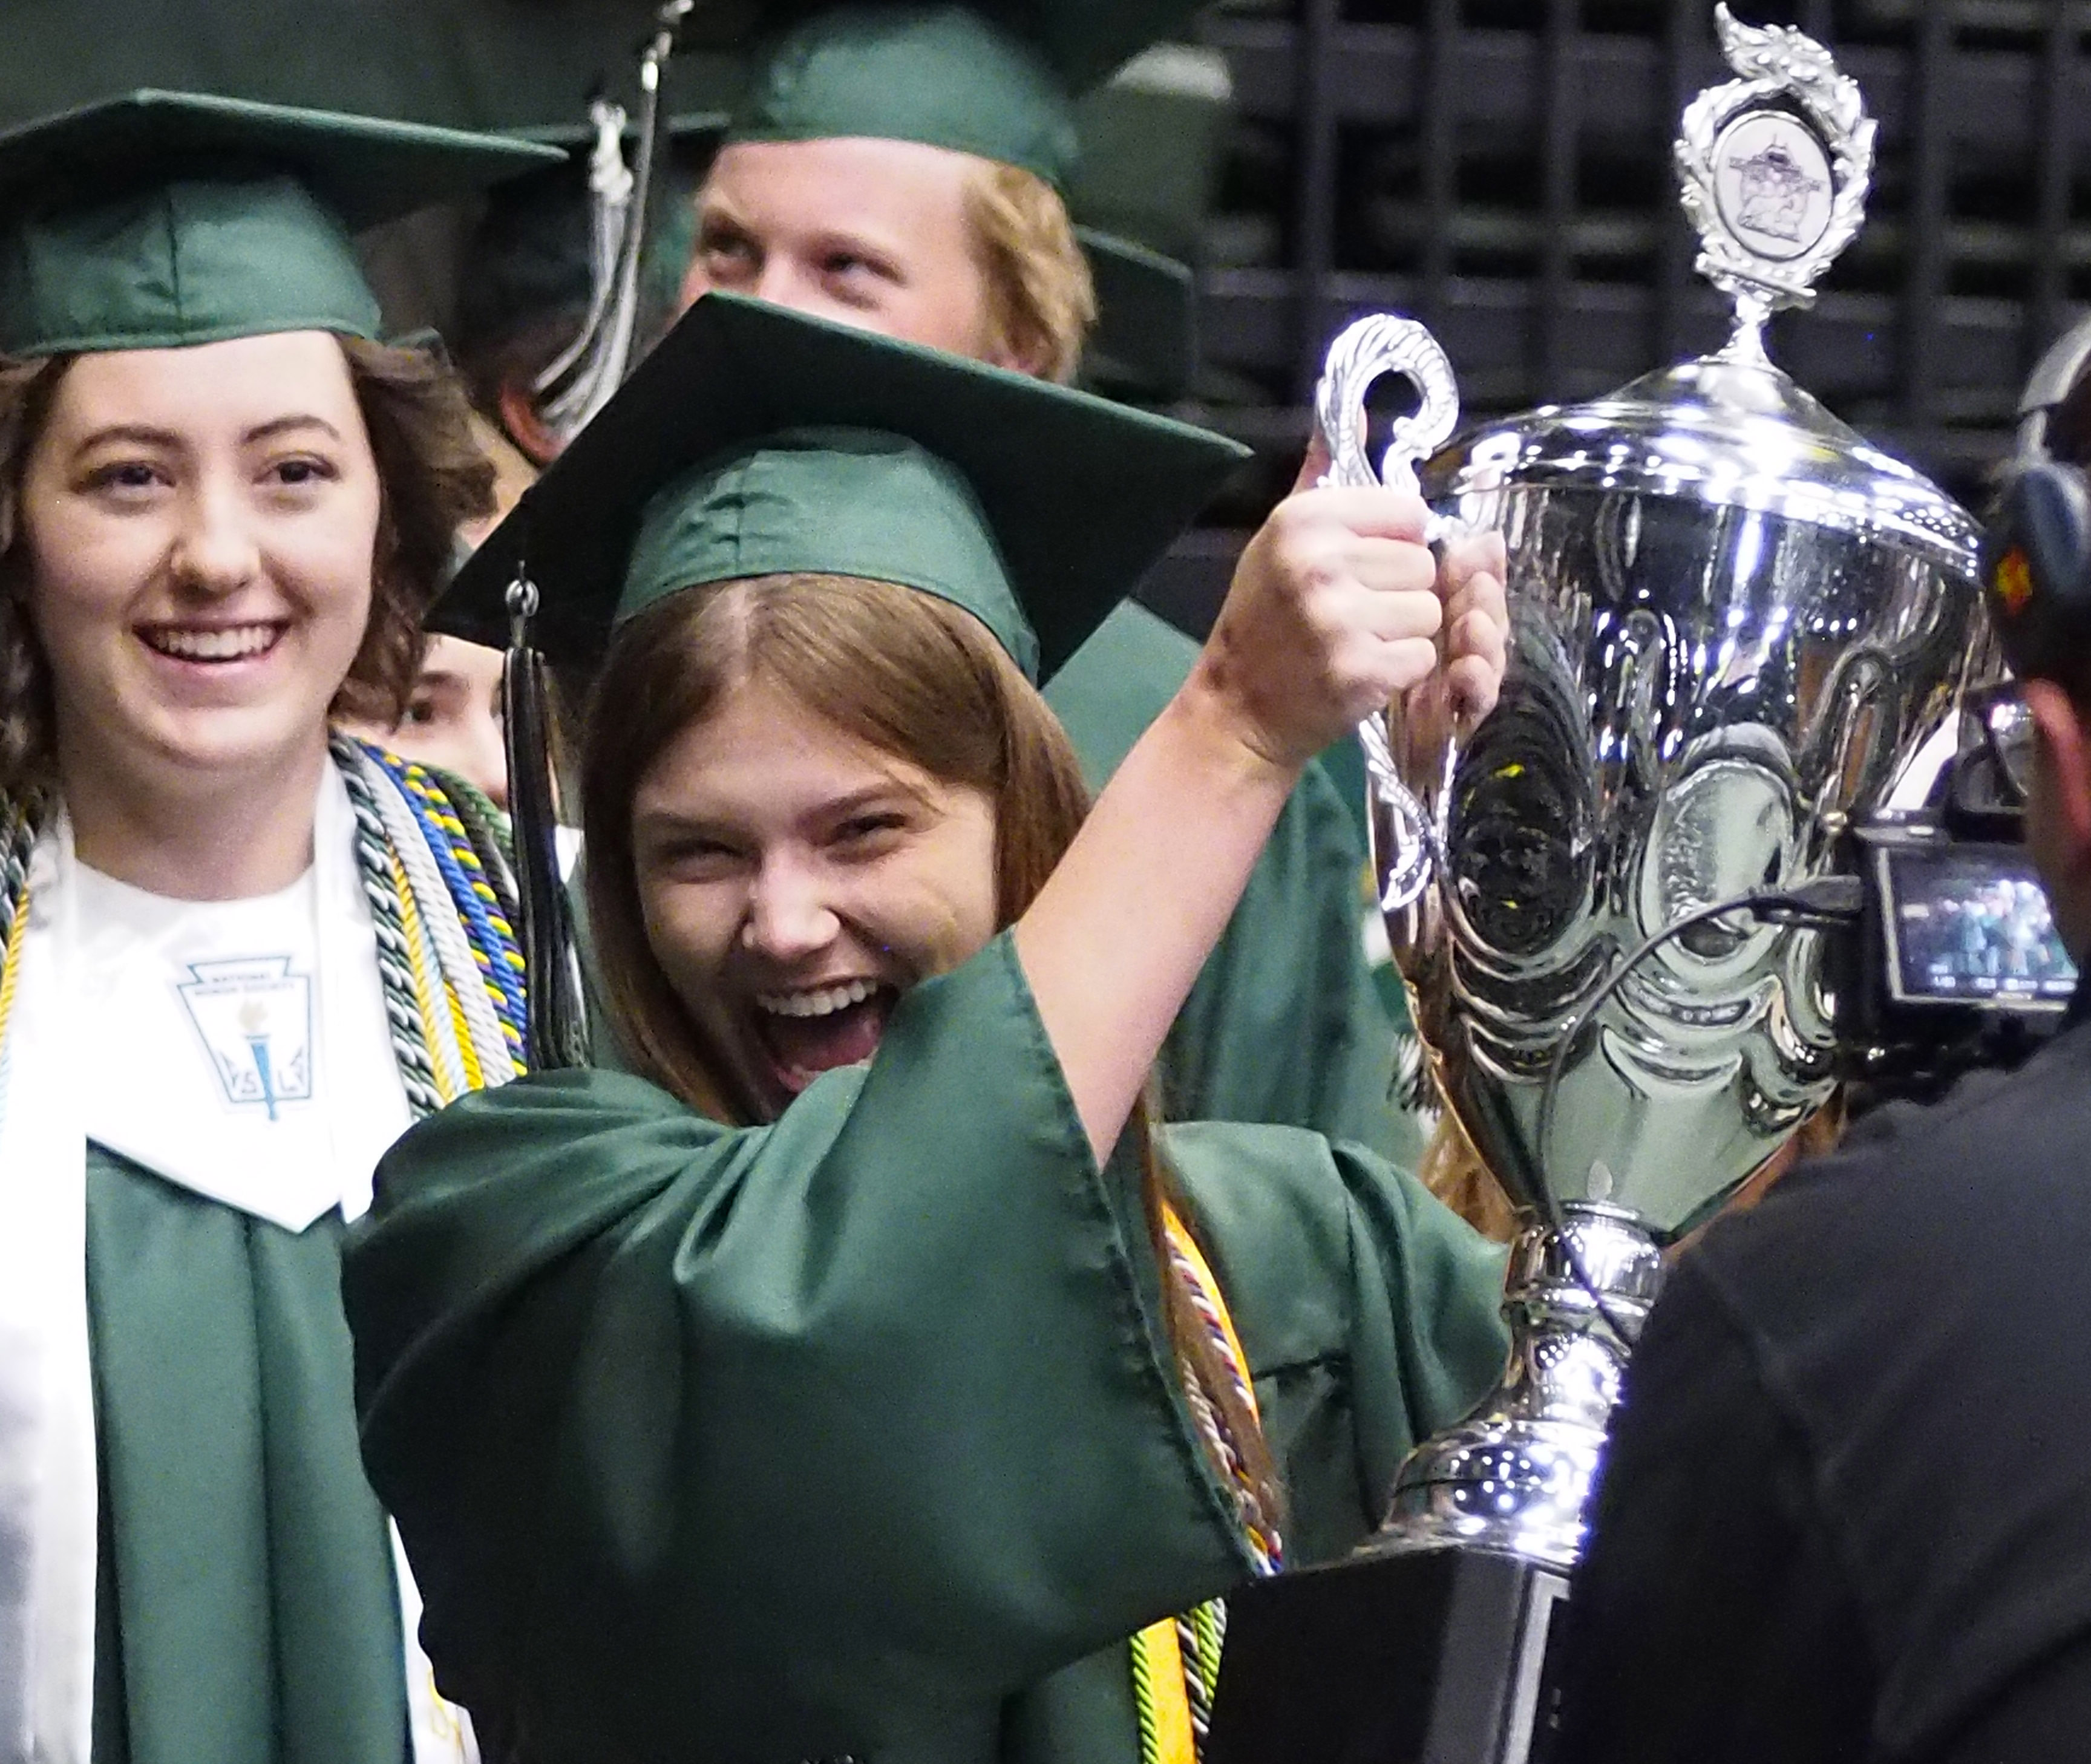 A Fossil Ridge High School graduate cheers while holding the senior cup.